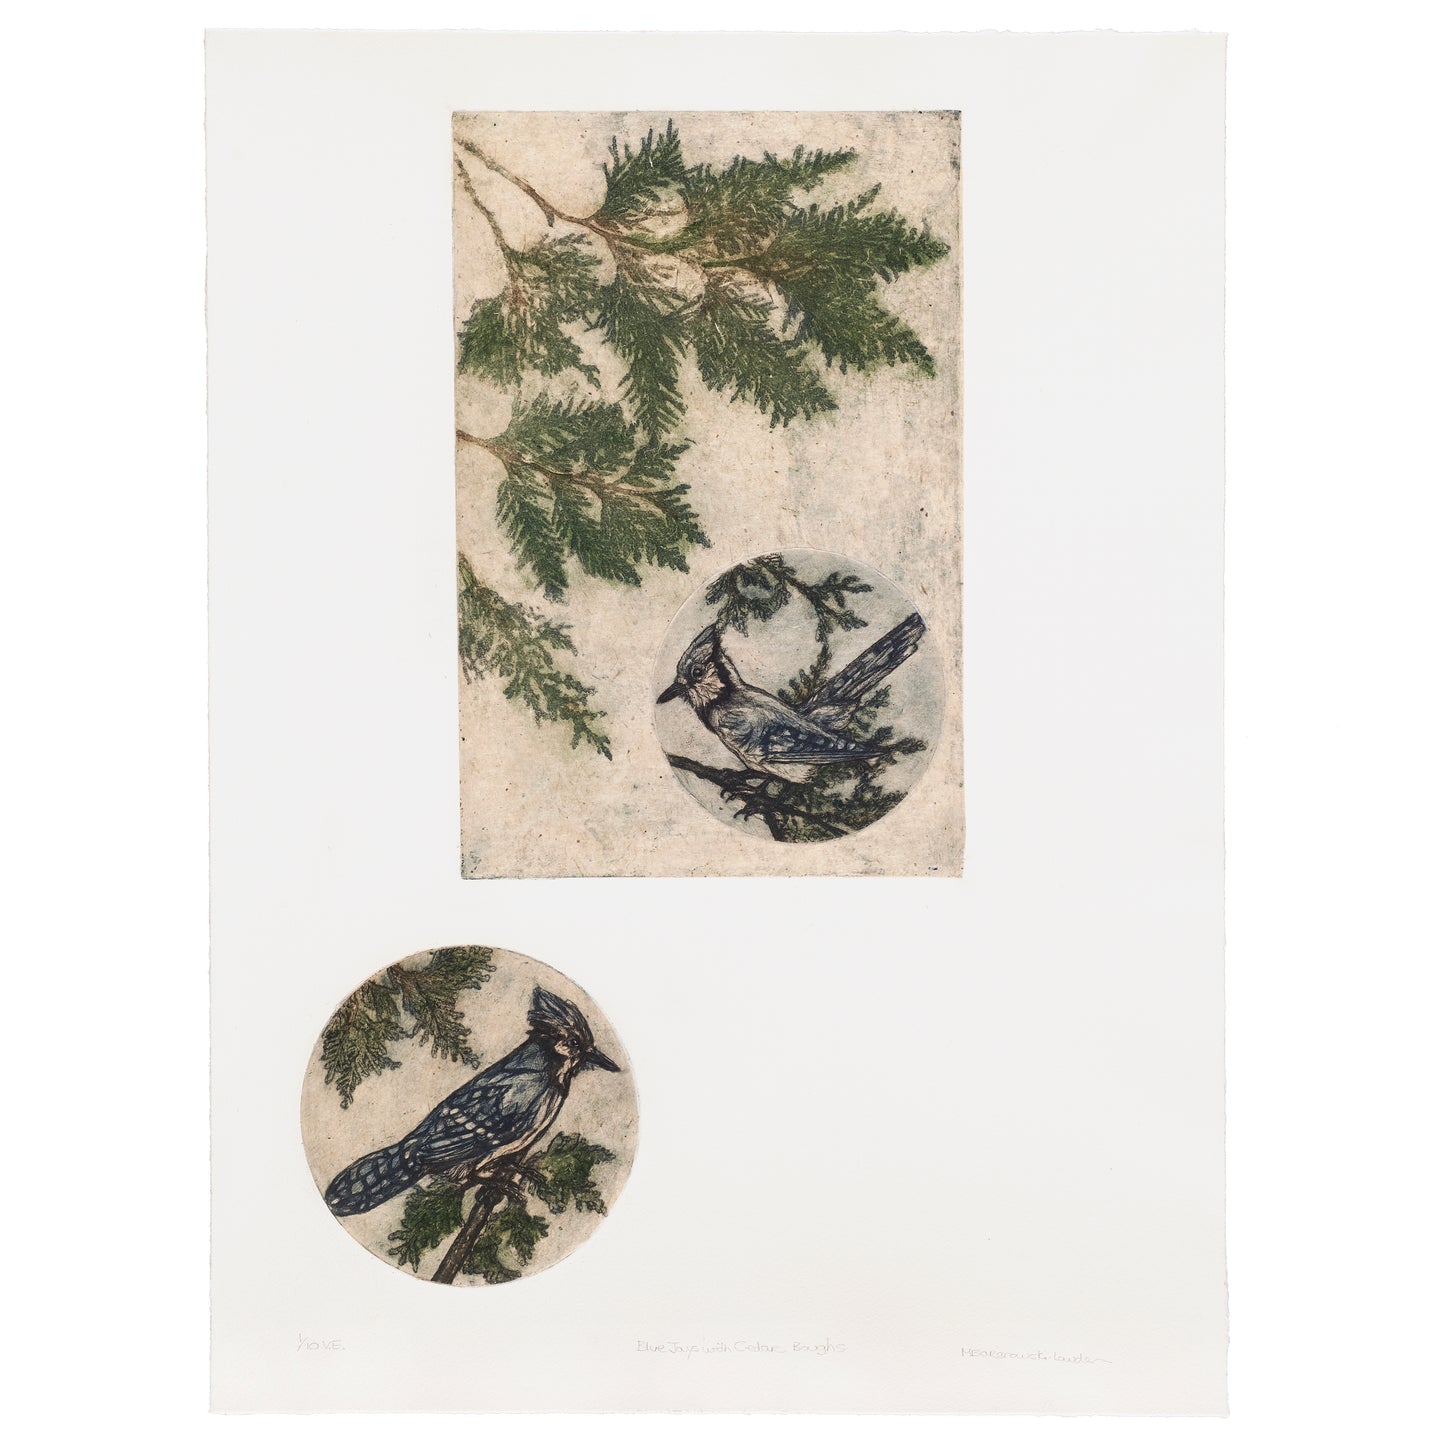 FUTURE PROOF 2023 Lot 5: Mary Baranowski-Lowden - Blue Jays with Cedar Boughs